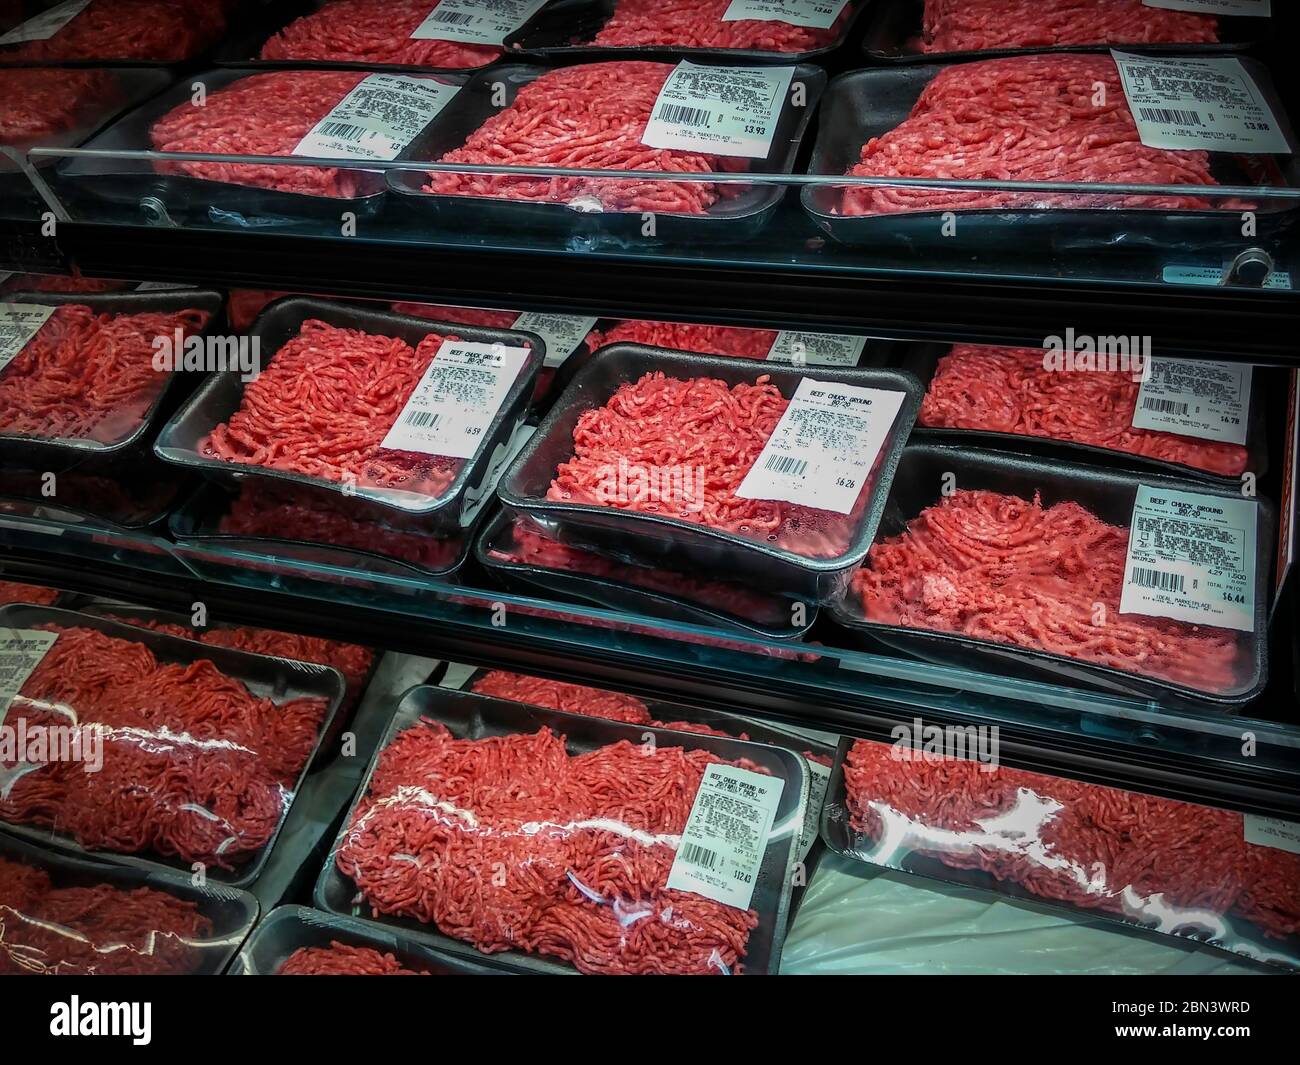 An attractive display of meat in the butcher department of a supermarket in New York on Wednesday, May 6, 2020. Prices of meat are starting to rise due to the closing of processing plants and some stores are limiting the amount of meat customers are allowed to purchase. (© Richard B. Levine) Stock Photo